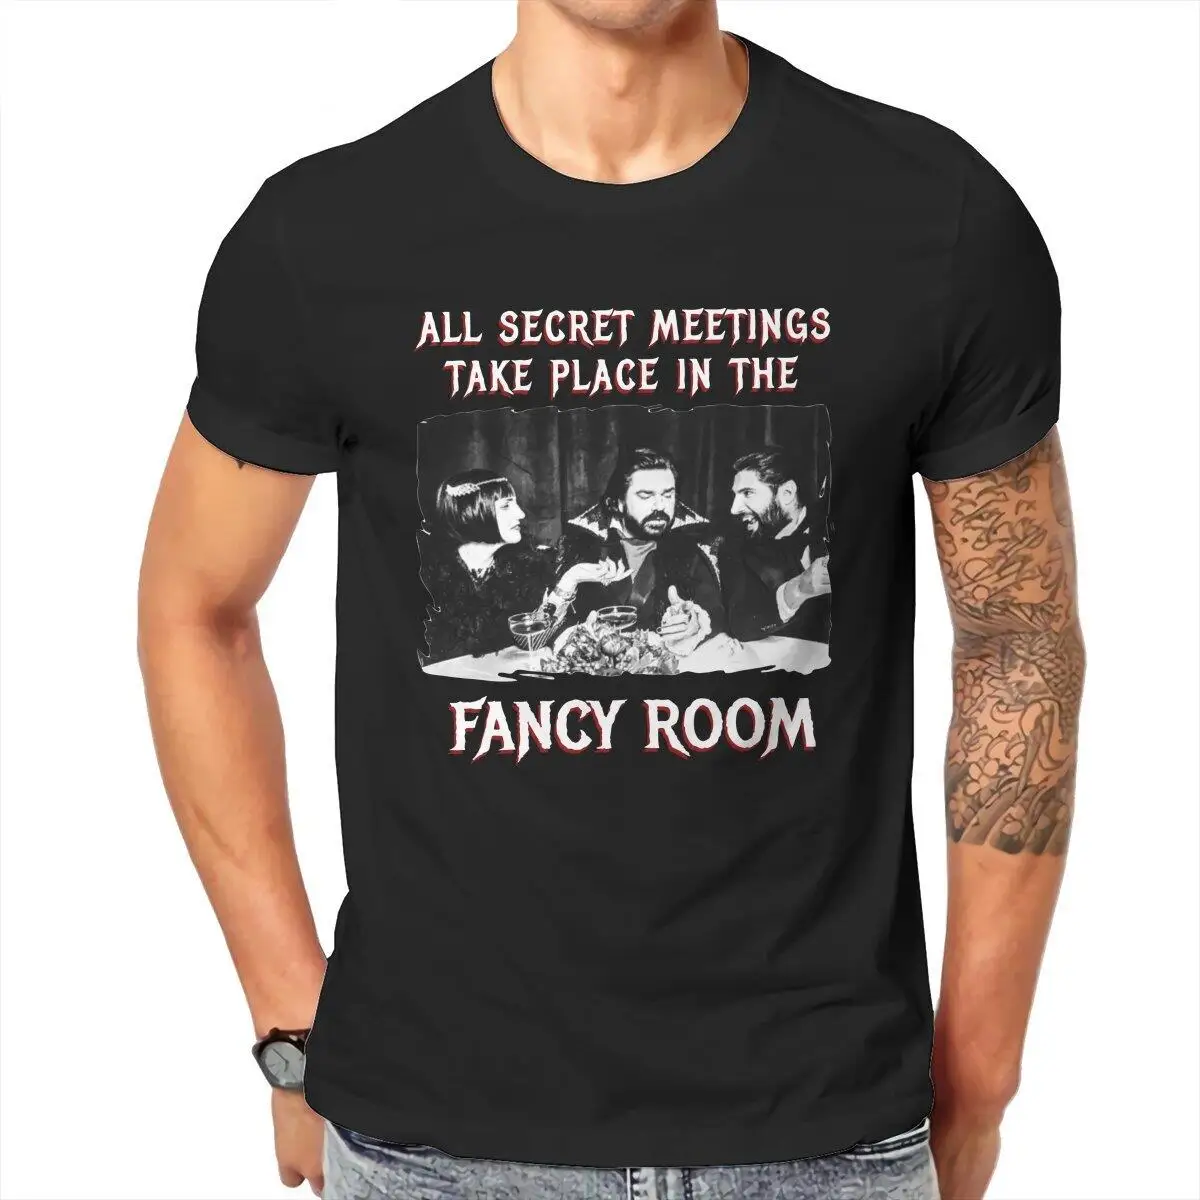 What We Do in the Shadows Secret Meetings  T-Shirts for Men  Humorous 100% Cotton Tees Crewneck Short Sleeve T Shirts Adult Tops